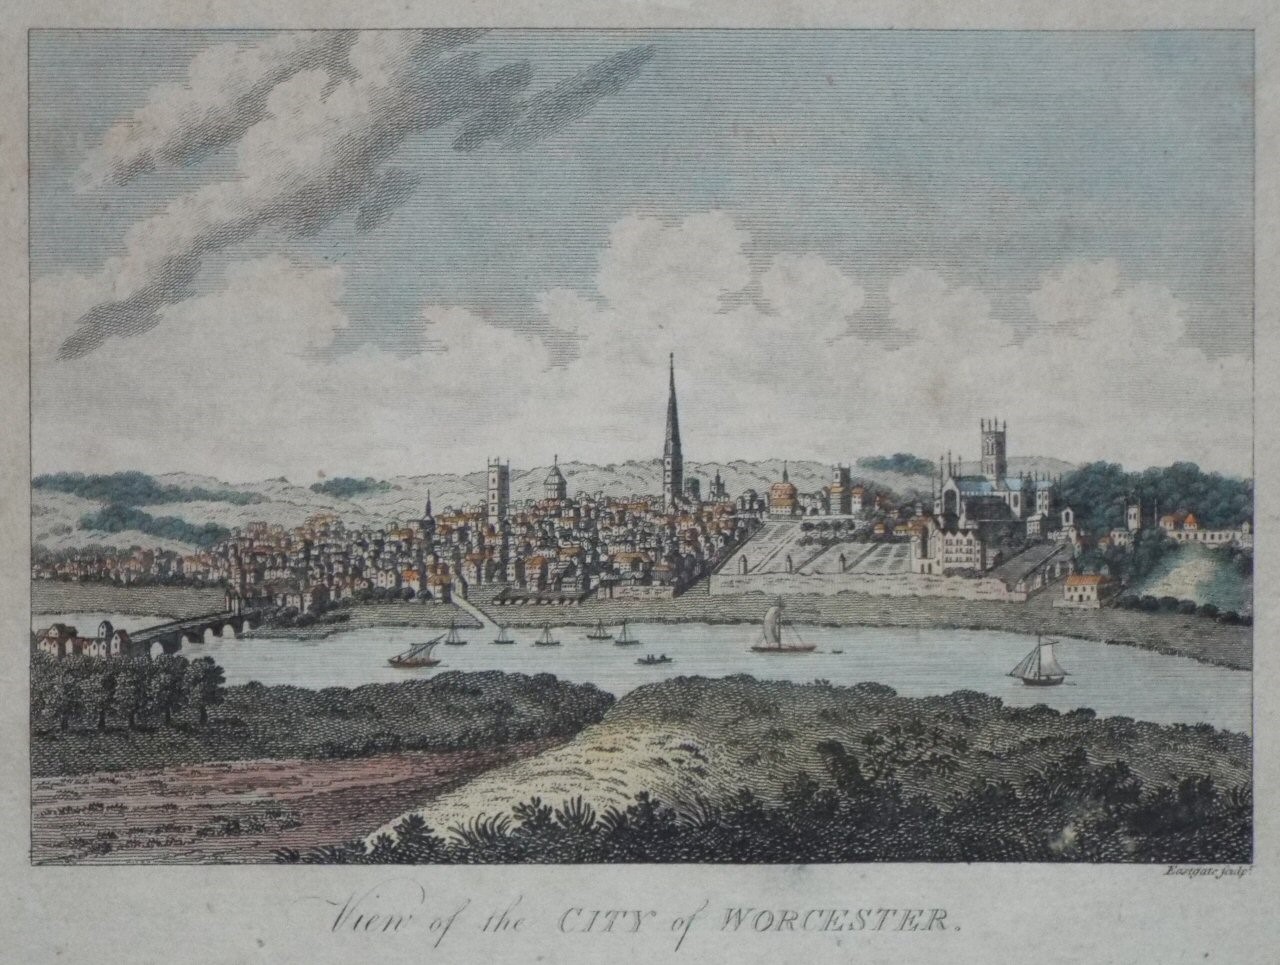 Print - View of the City of Worcester. - 